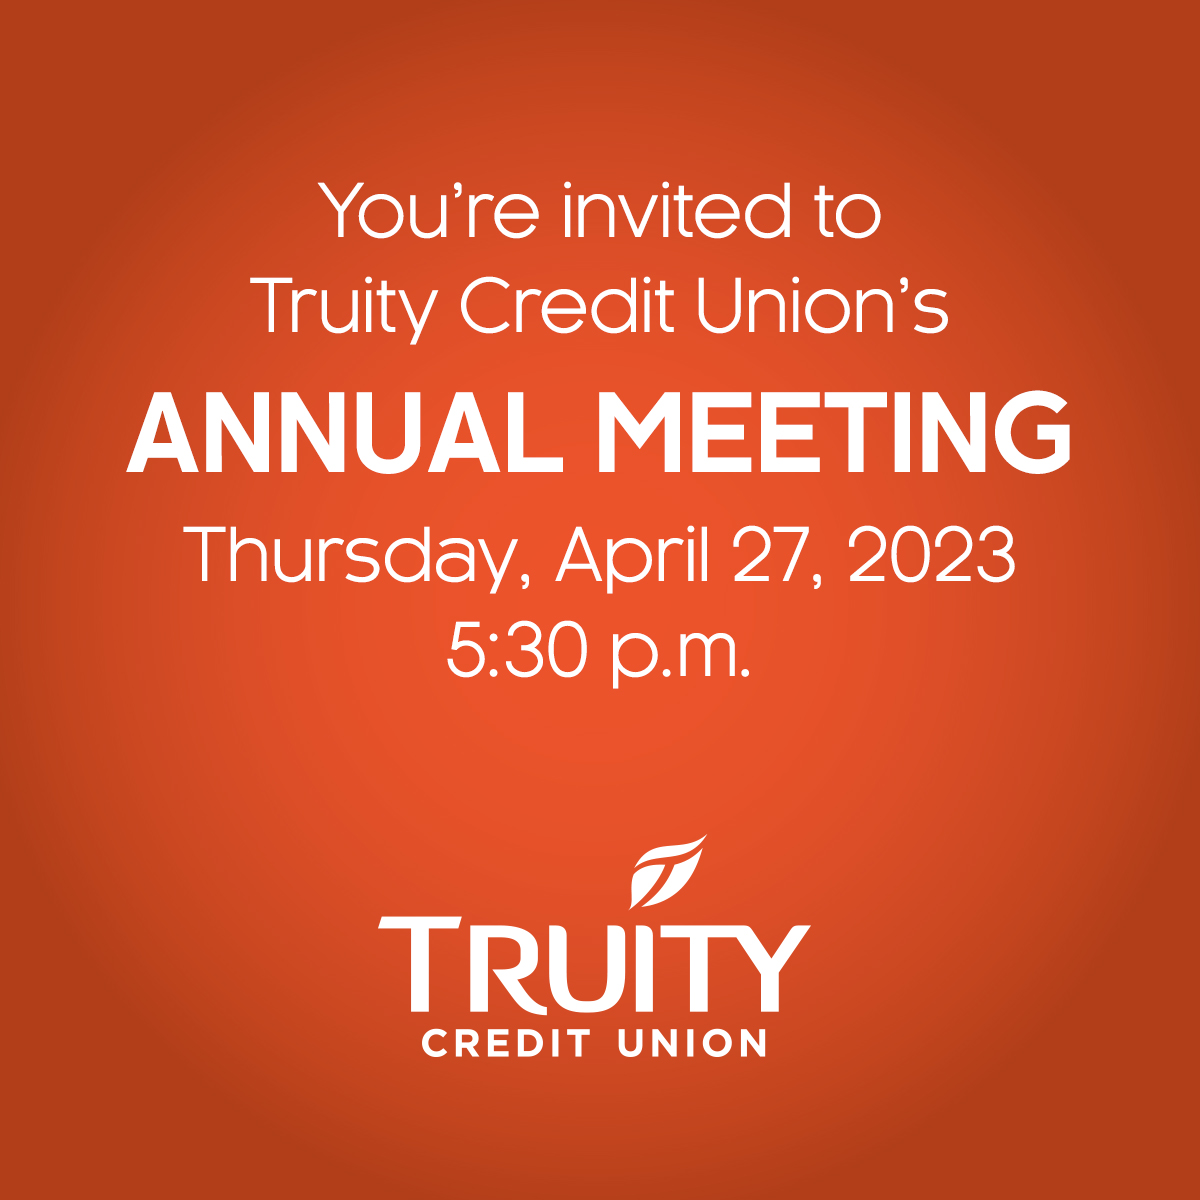 Truity Credit Union will hold 84th Annual Meeting